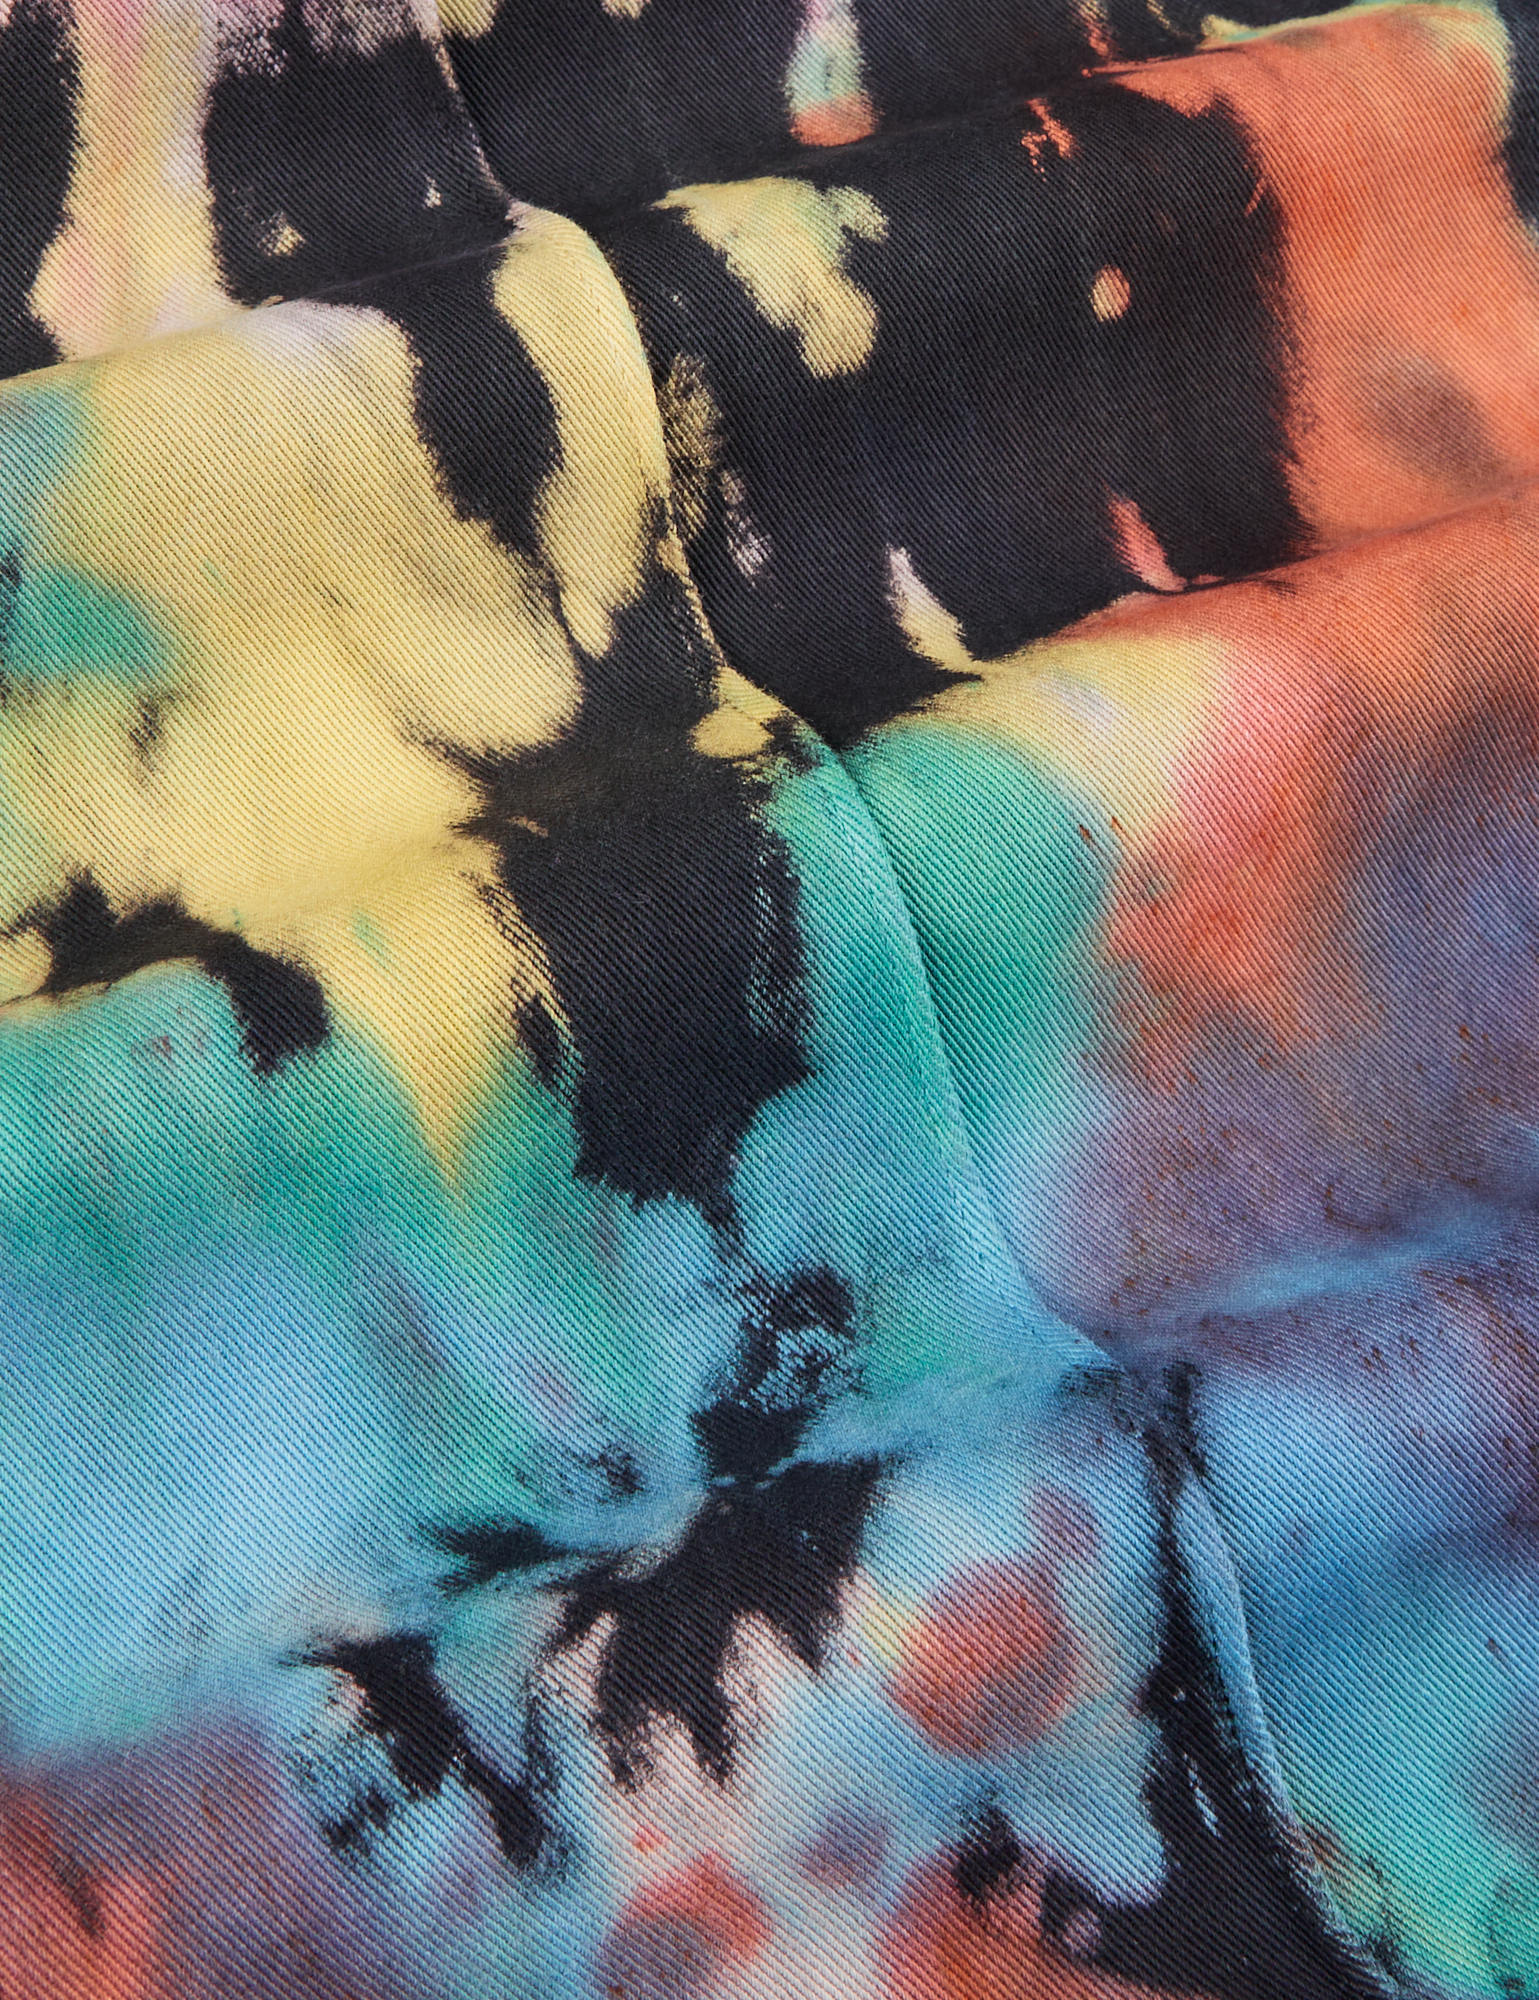 Western Pants in Rainbow Magic Waters fabric detail close up. Tie dye in blues, greens, reds, yellows and oranges